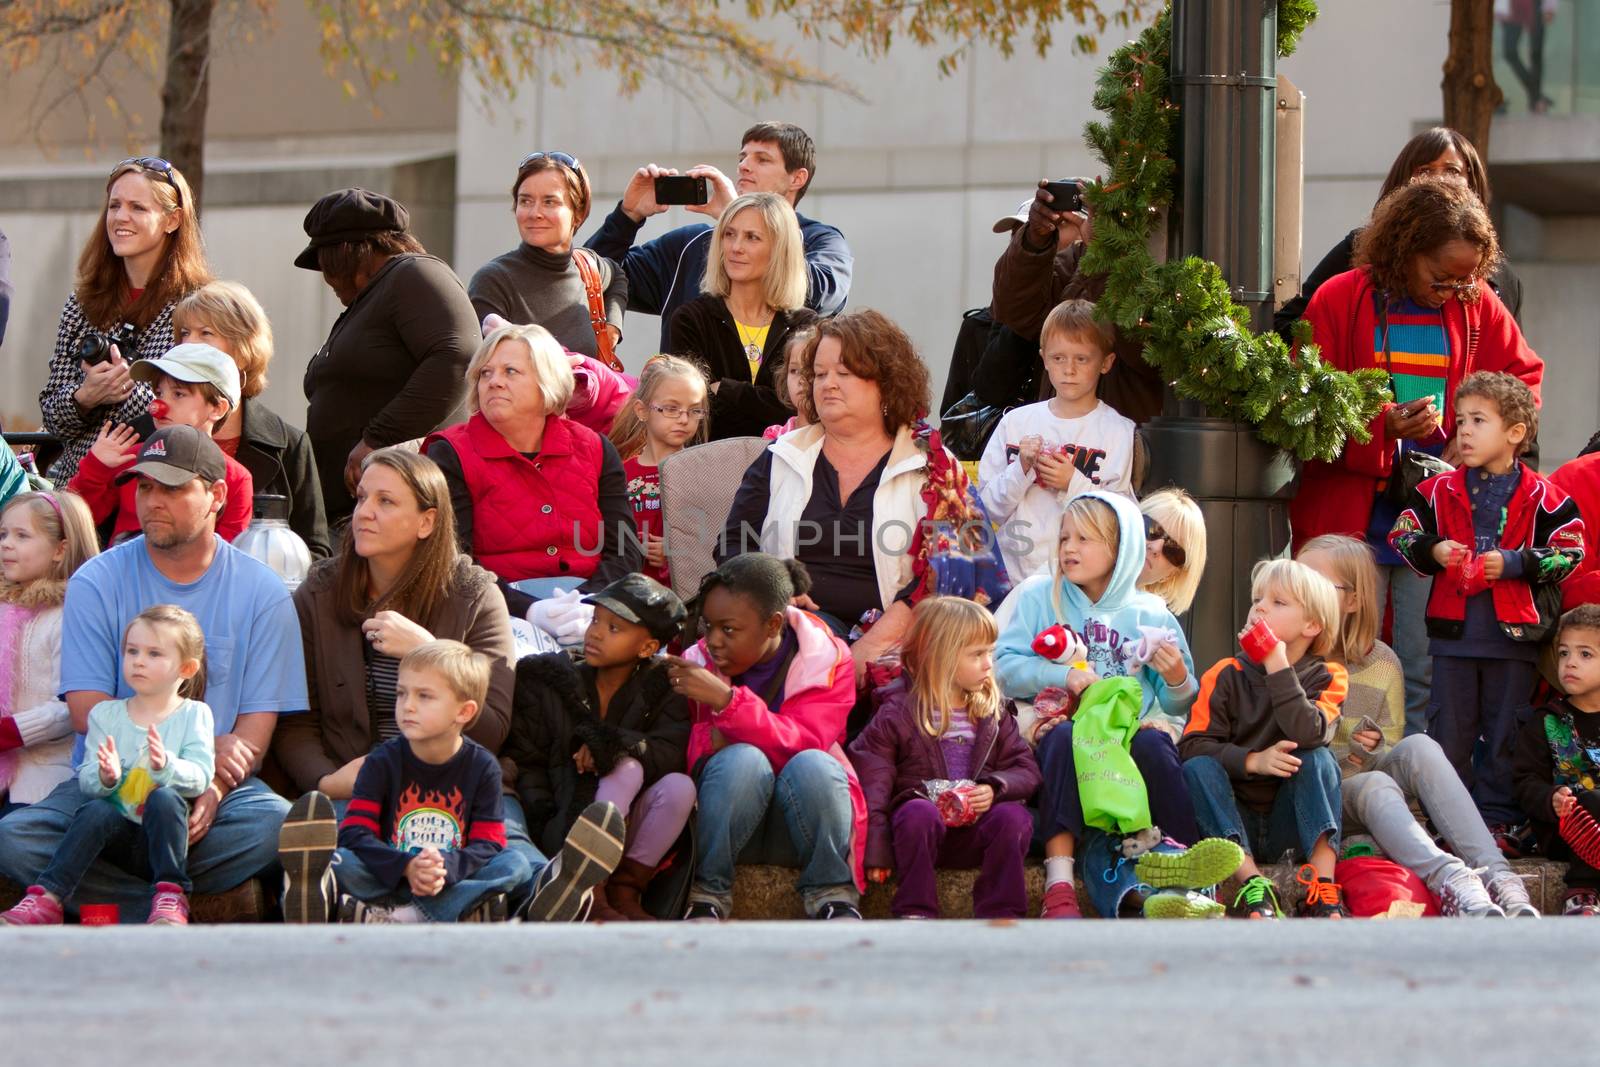 Atlanta, GA, USA - December 1, 2012:  Spectators watch from the sidewalk and street curb as the Atlanta Christmas parade takes place down Peachtree Street in downtown Atlanta.